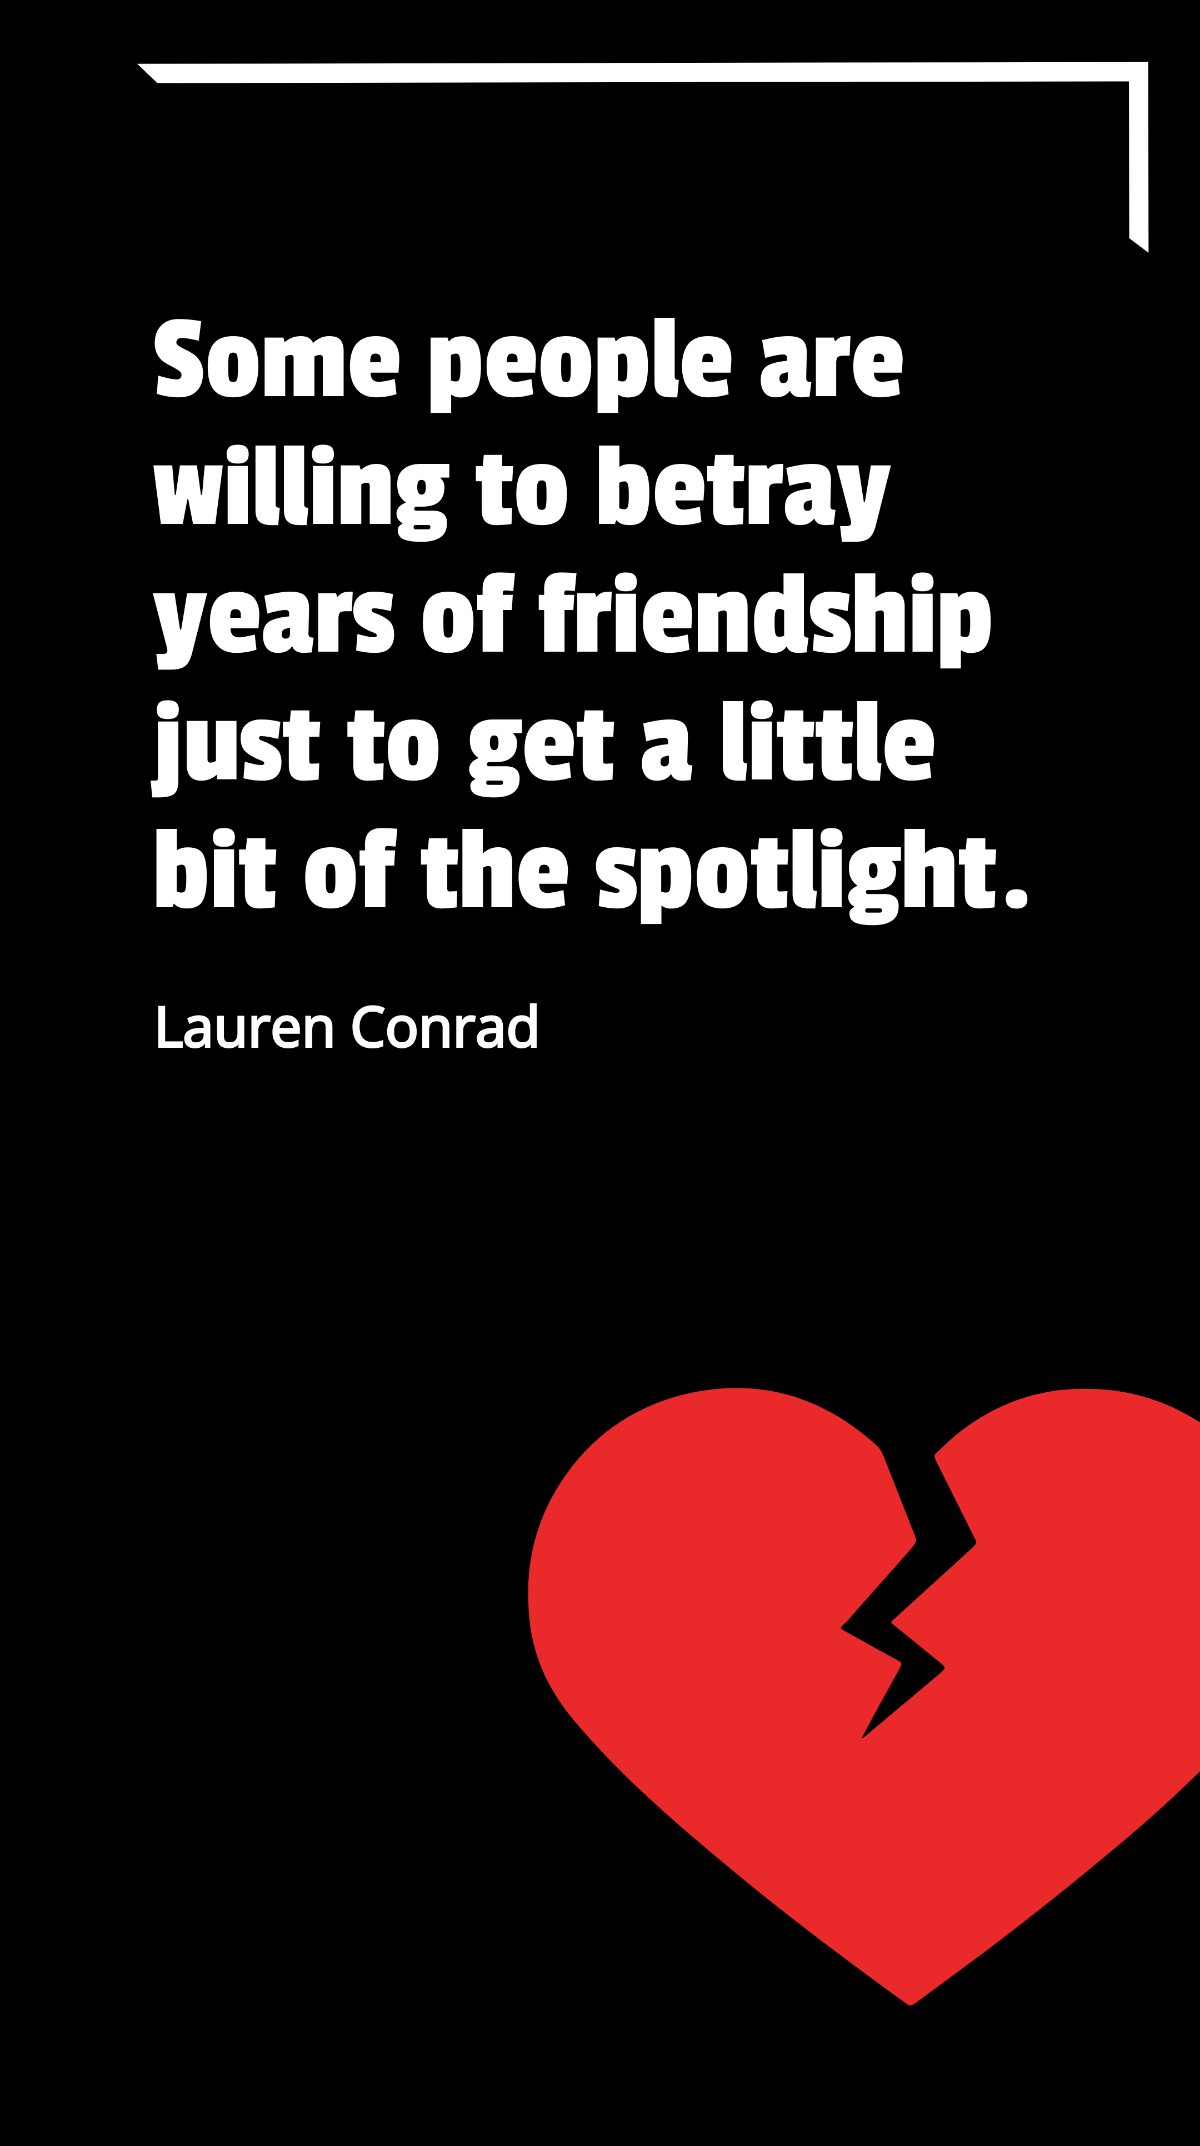 Lauren Conrad - Some people are willing to betray years of friendship just to get a little bit of the spotlight. Template